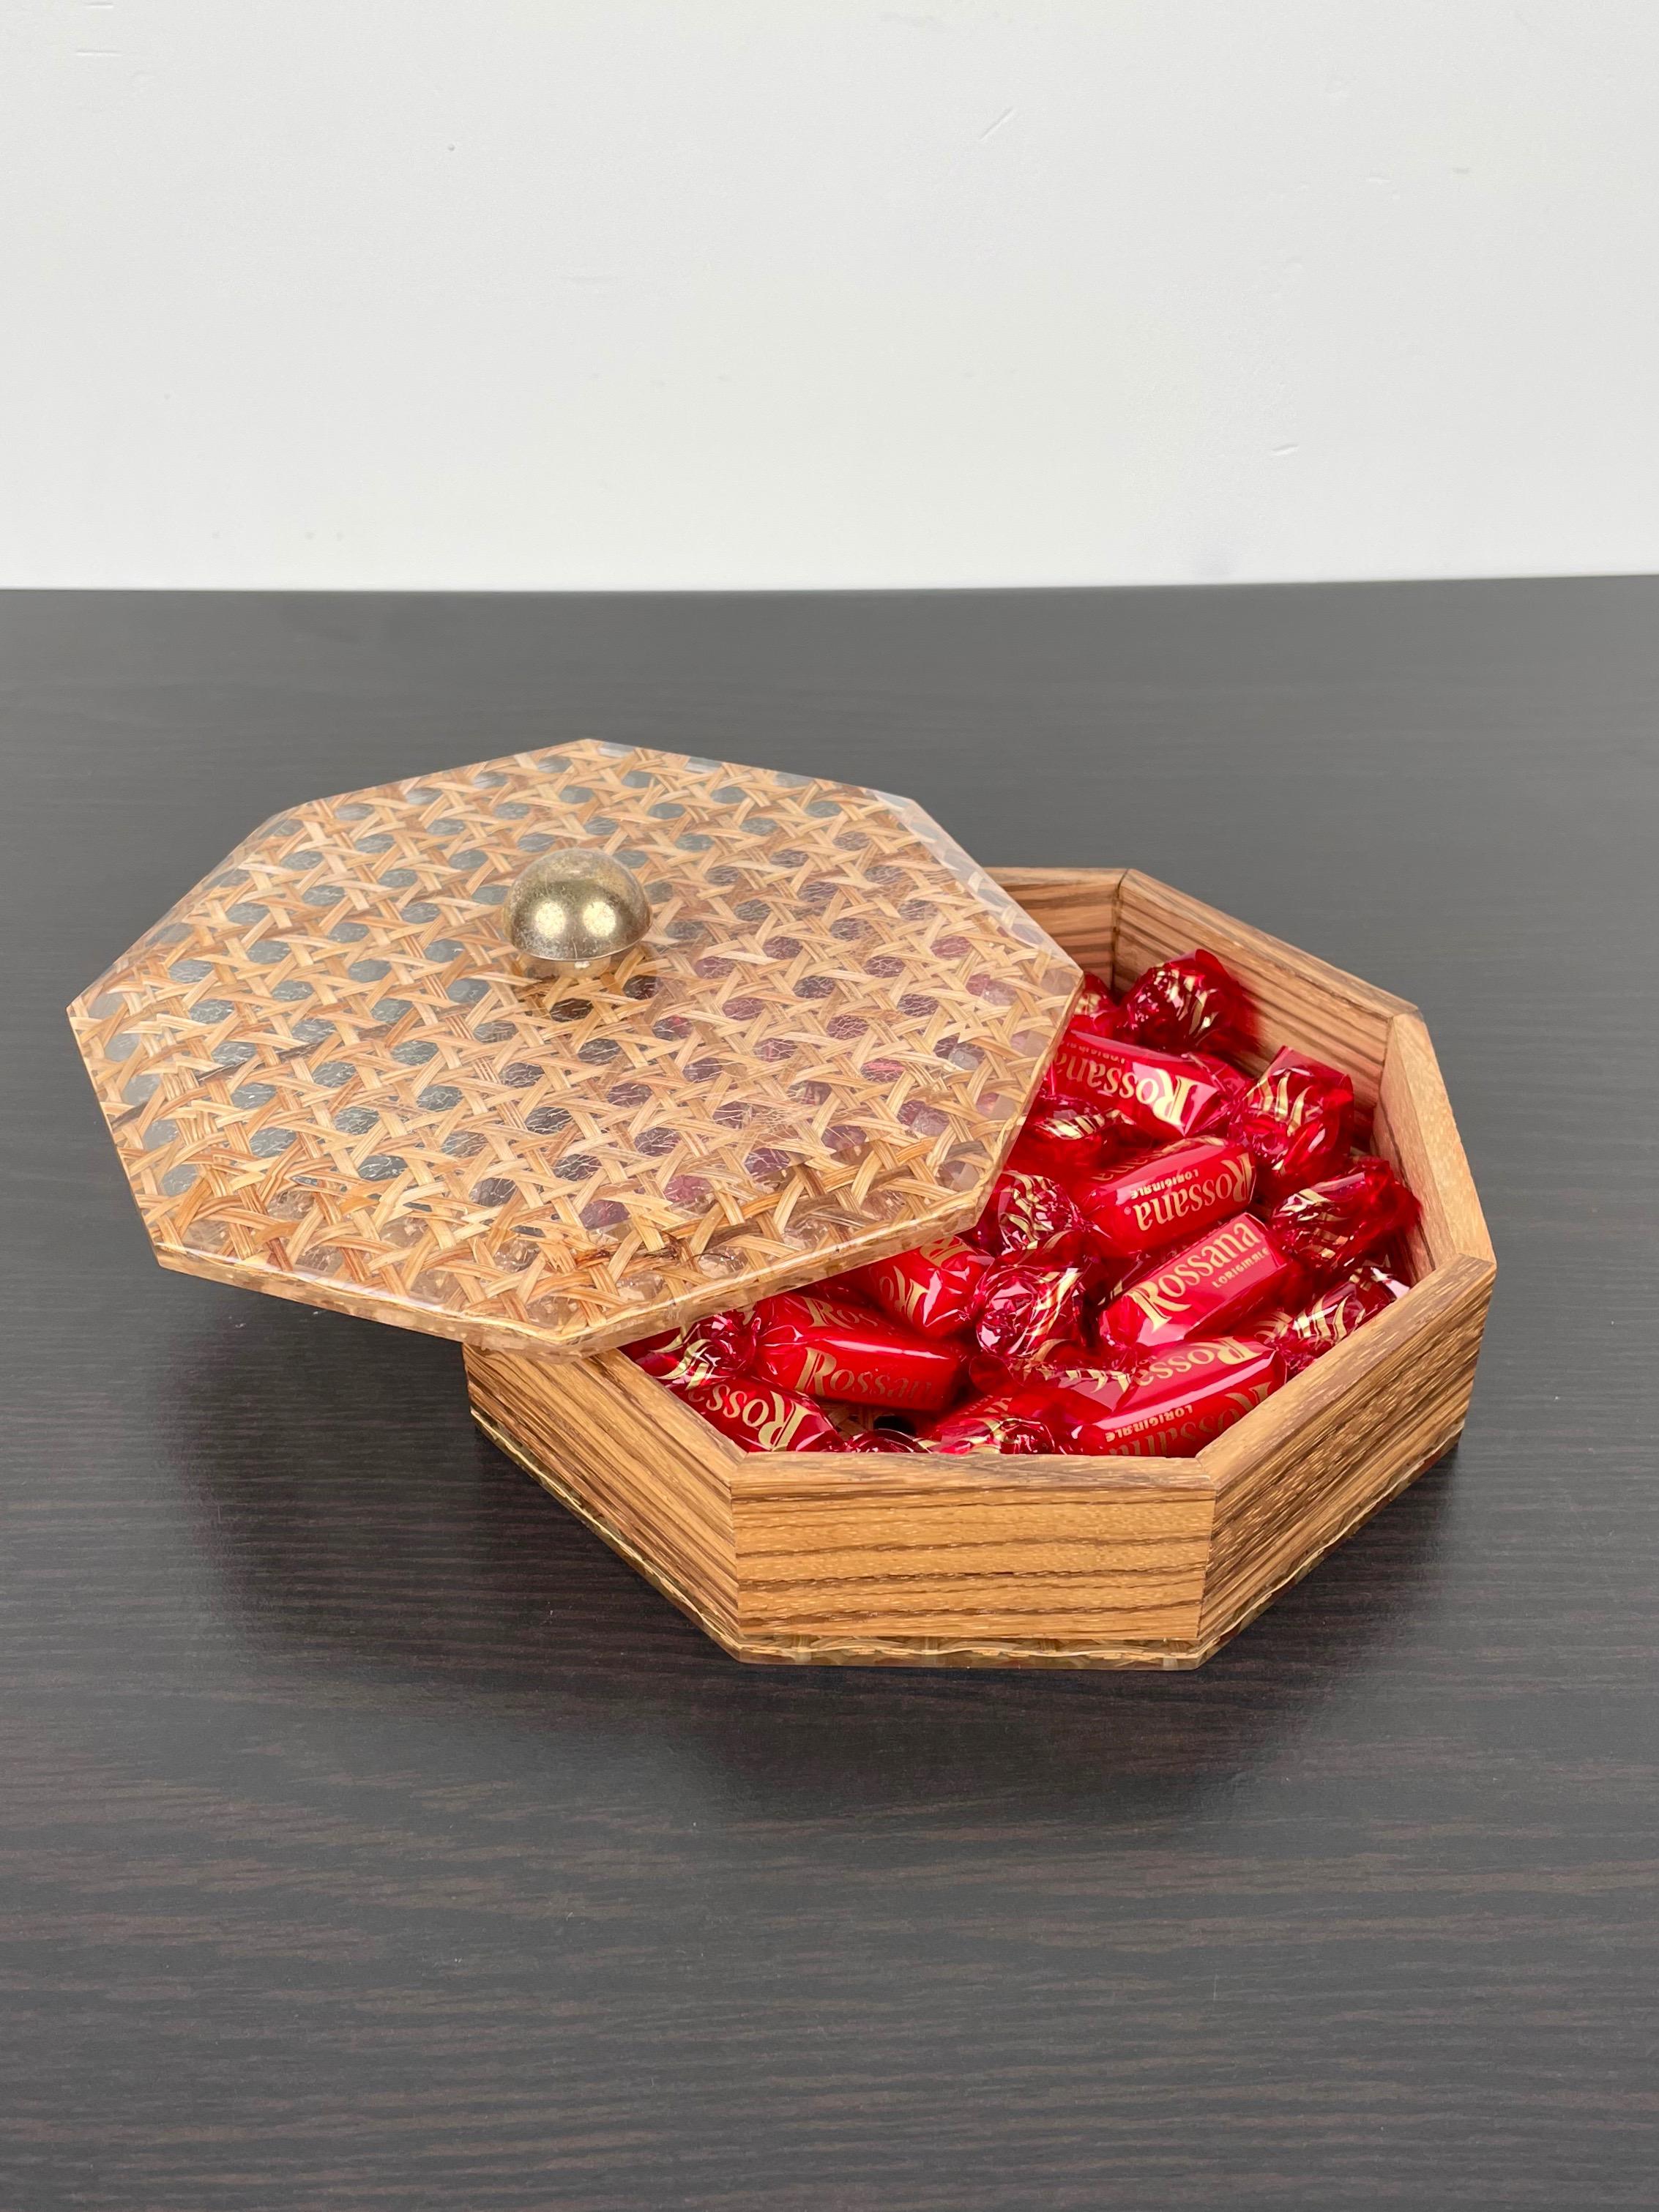 Metal Octagonal Box in Lucite Wicker Wood and Brass Christian Dior Style, France 1970s For Sale